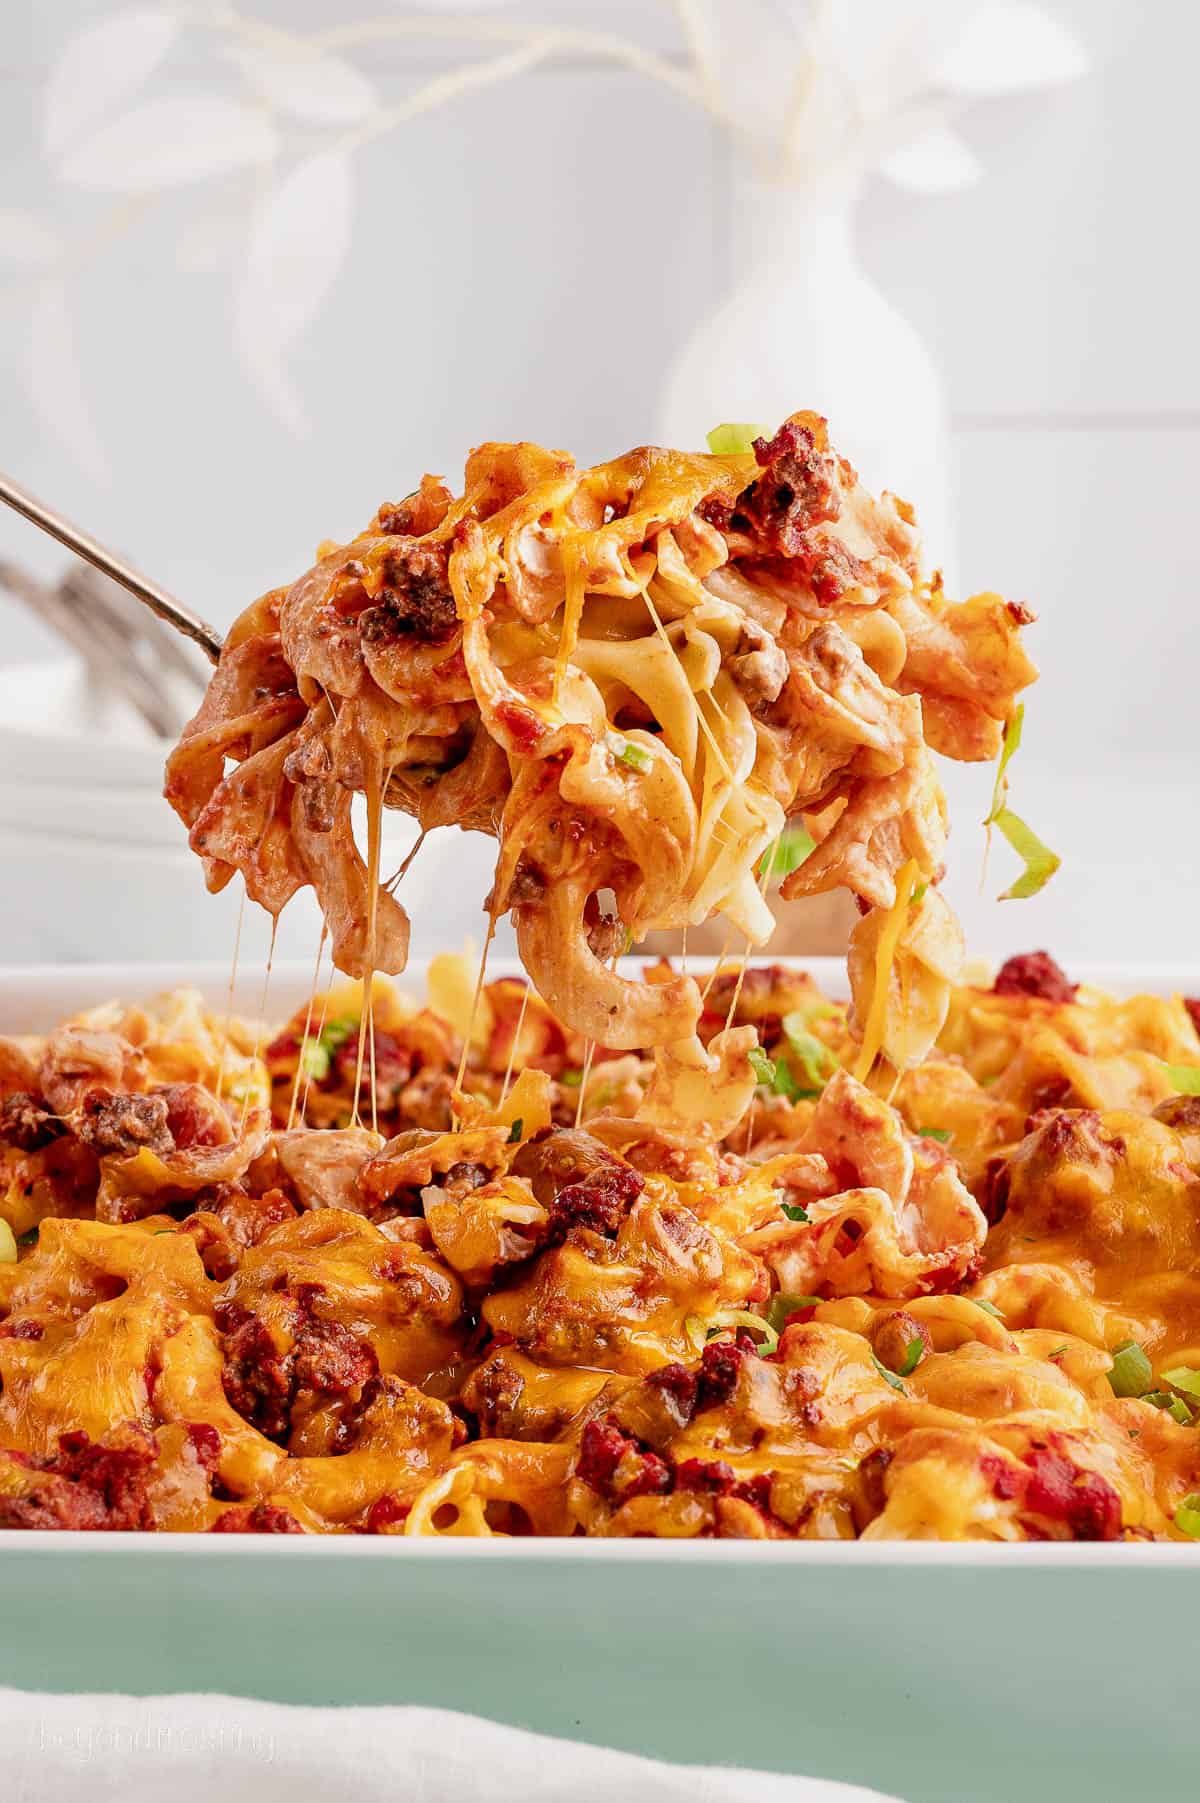 A spoon serving cheesy ground beef noodle casserole